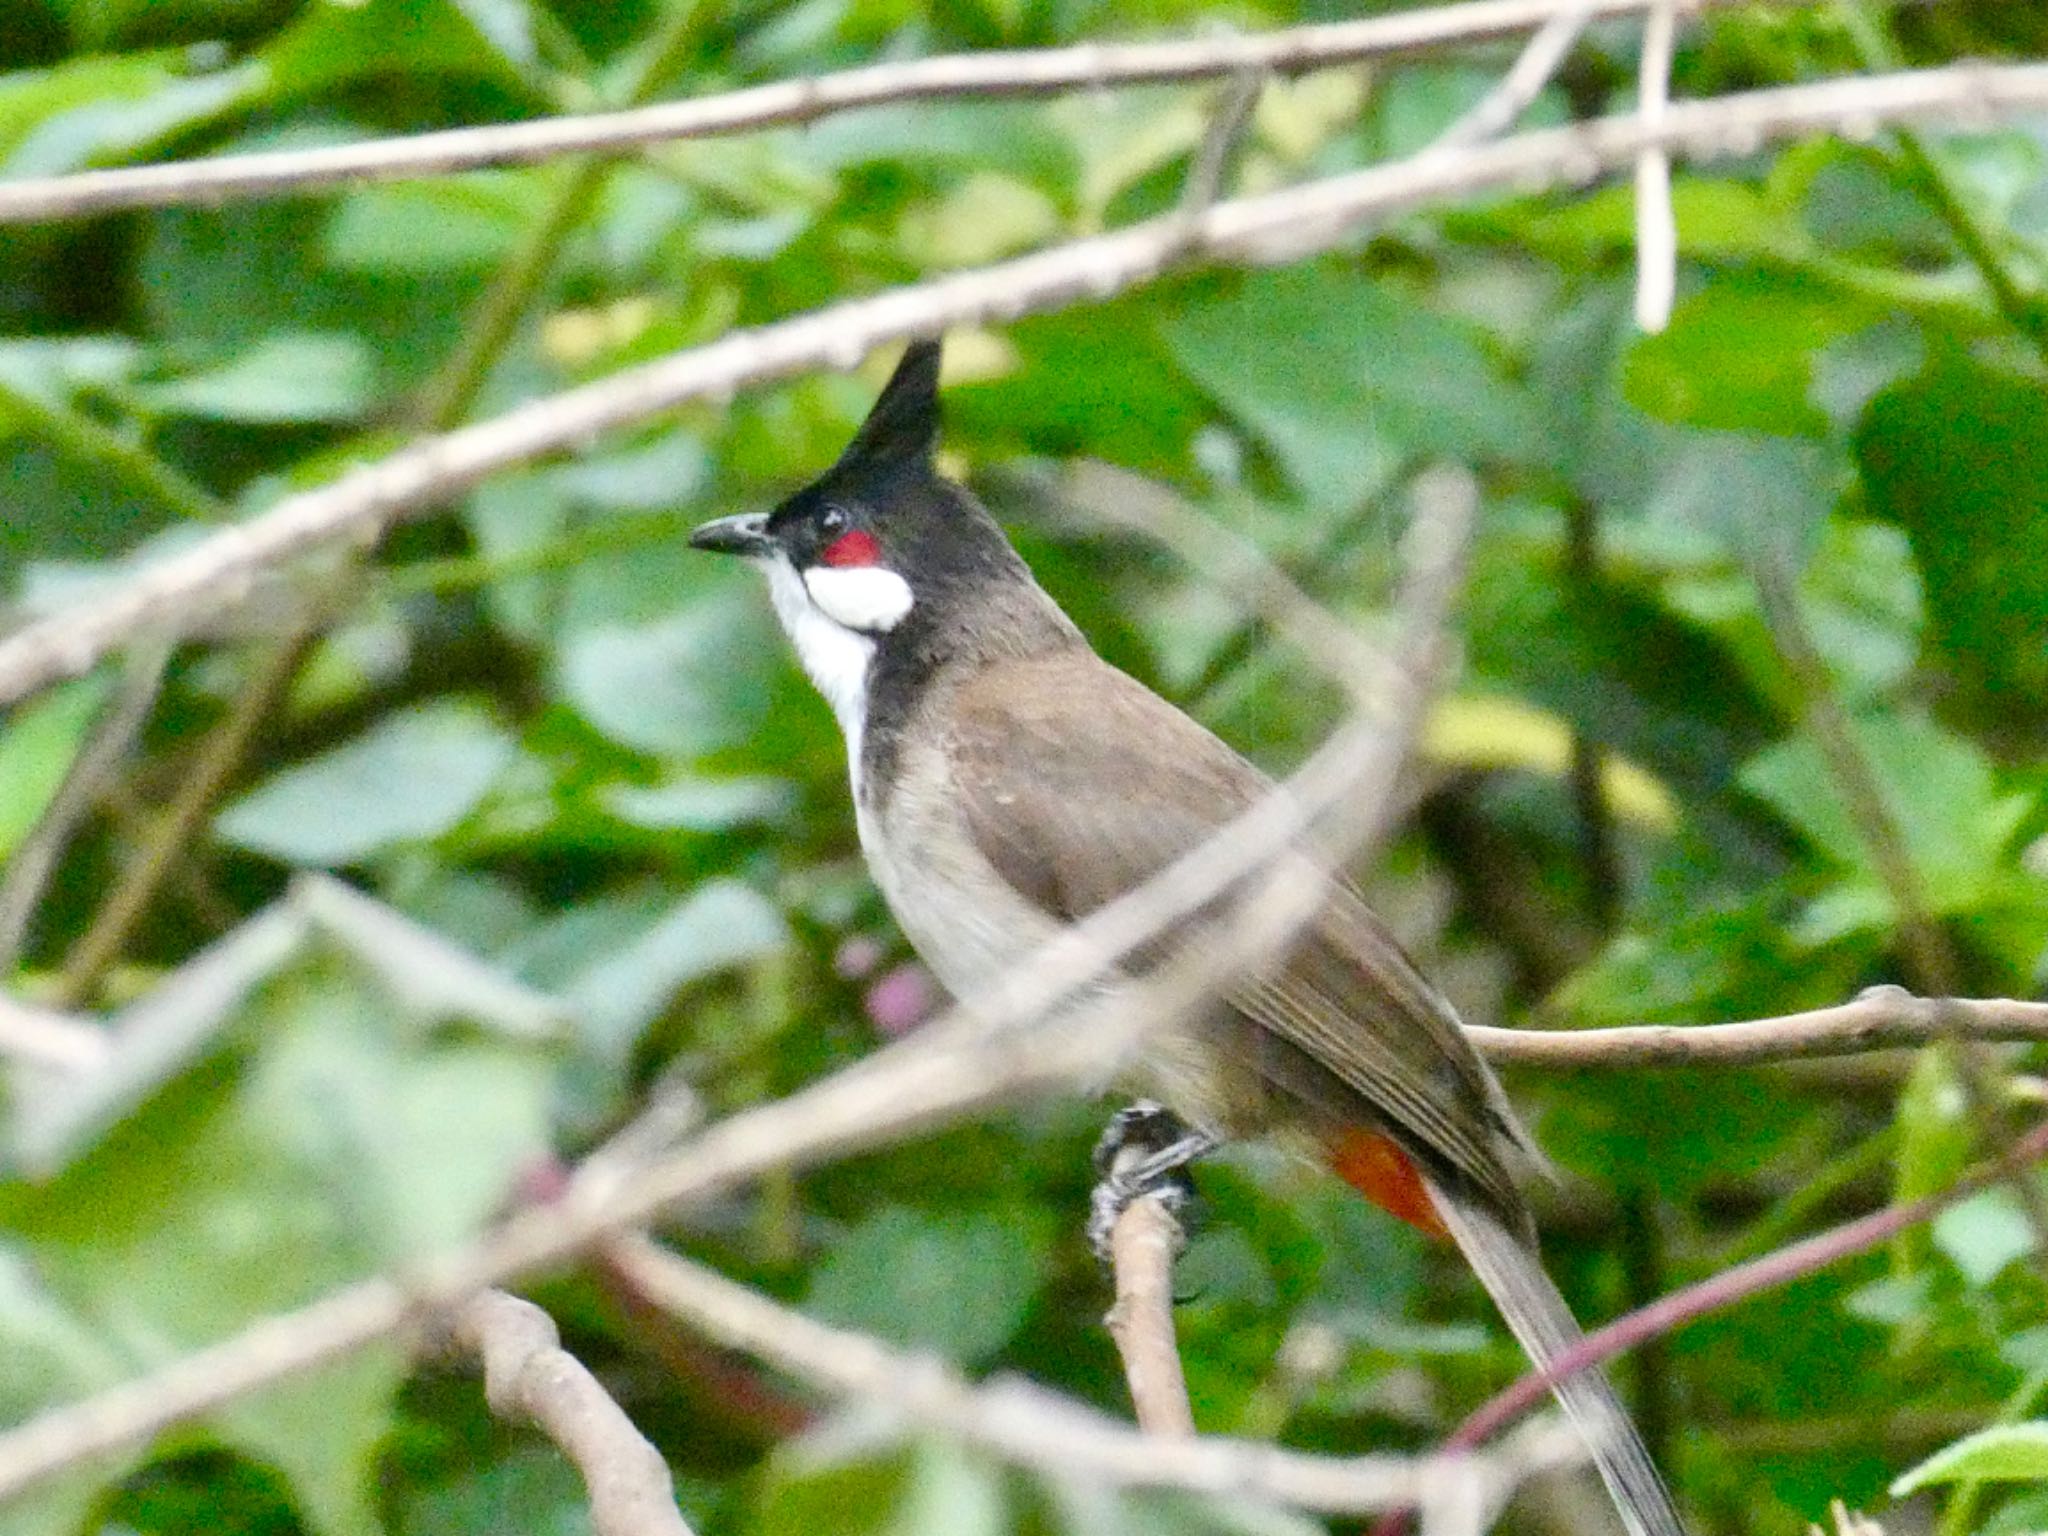 Photo of Red-whiskered Bulbul at Warners Park, Northbridge, NSW, Australia by Maki